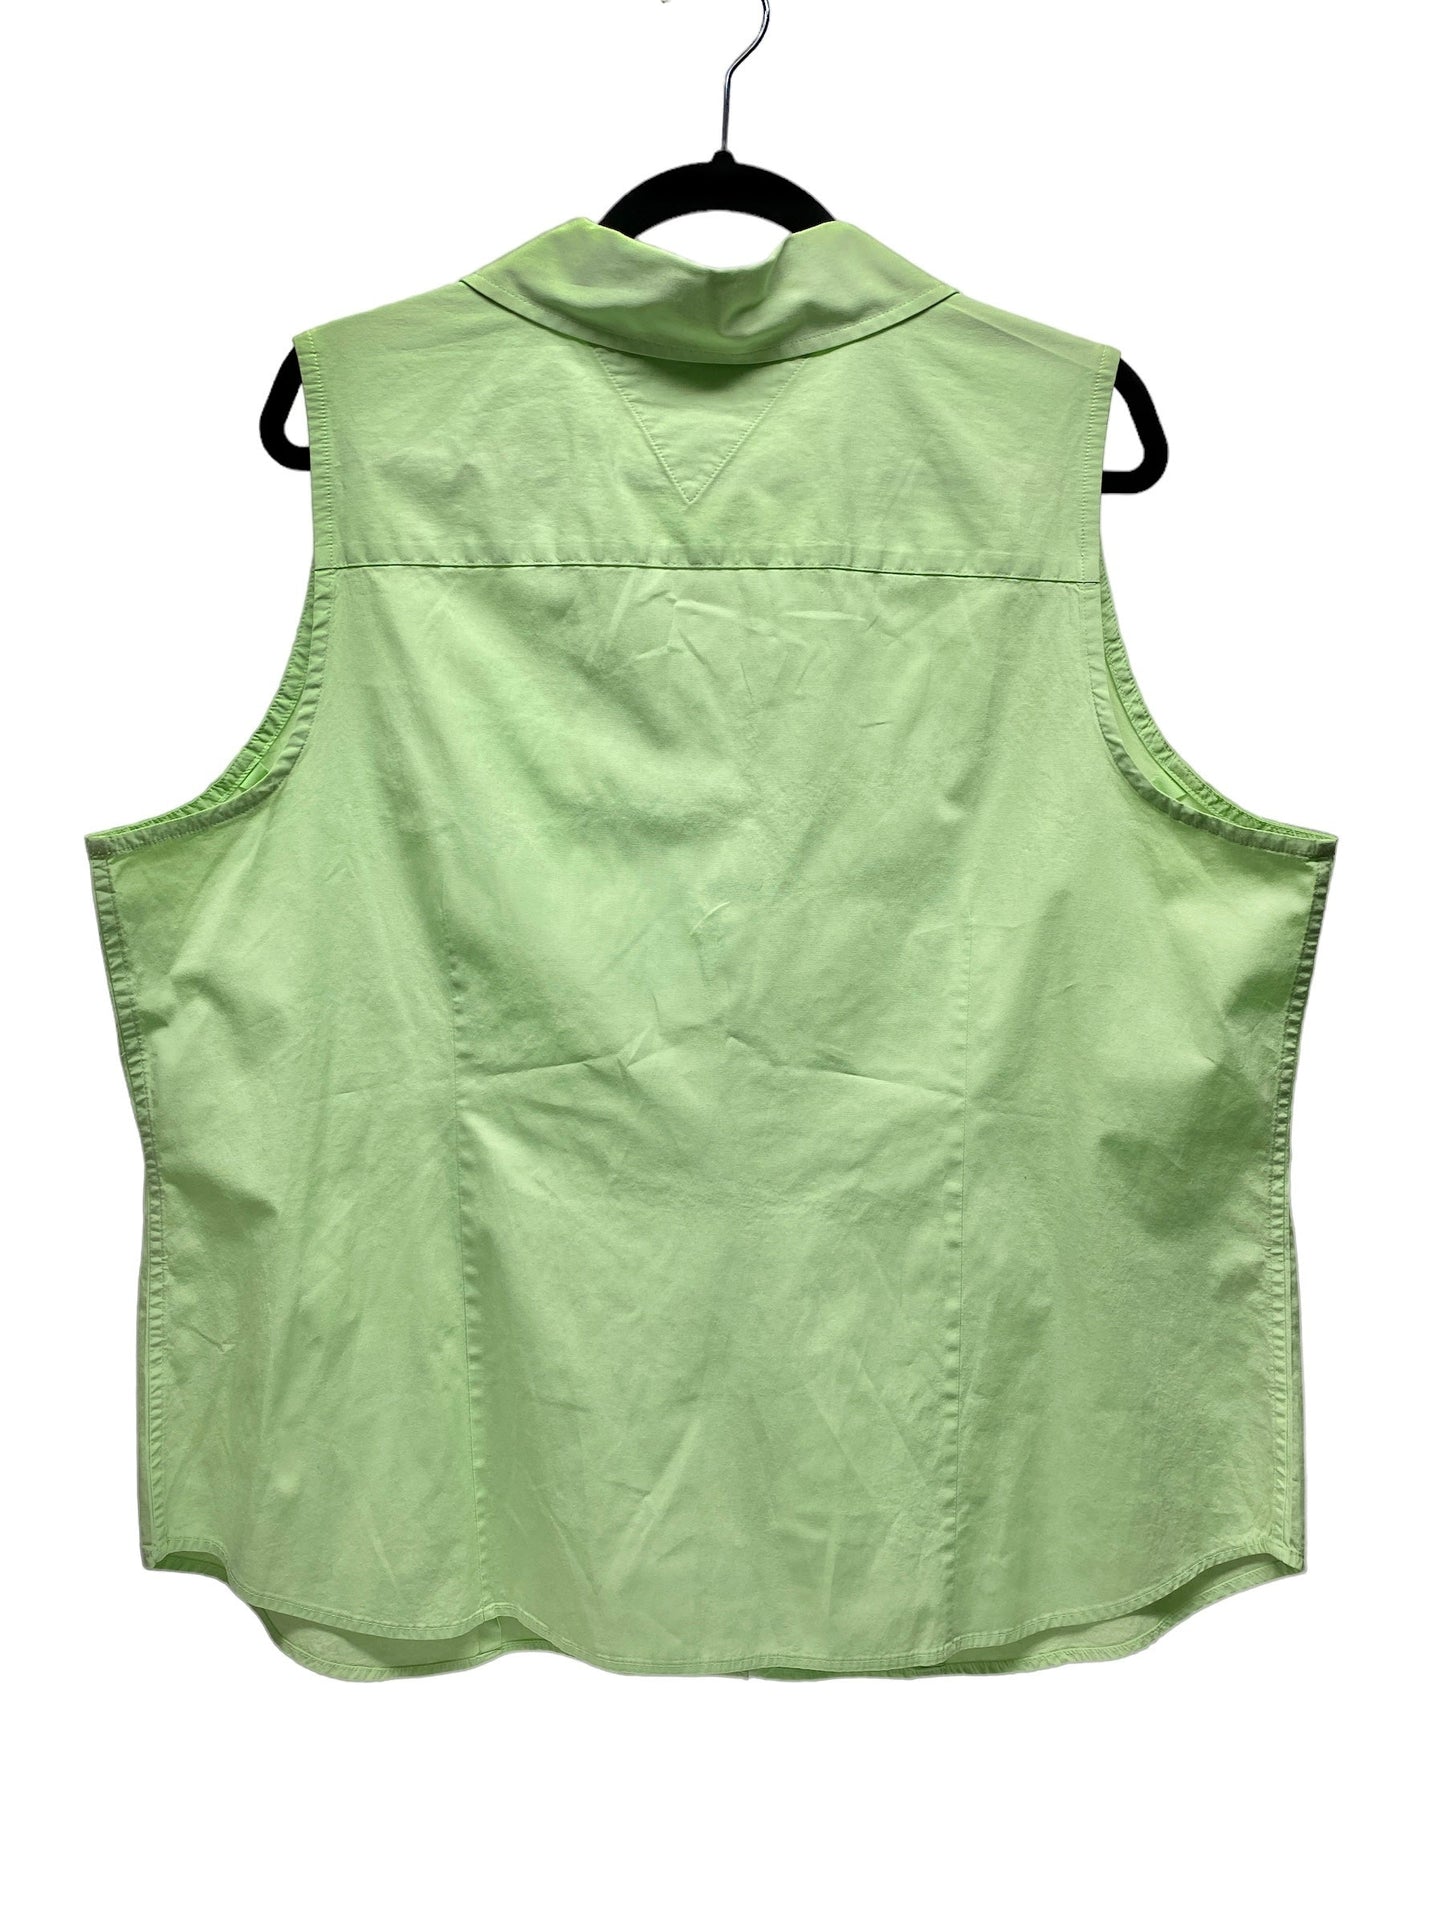 Top Sleeveless By Tommy Hilfiger  Size: Xxl